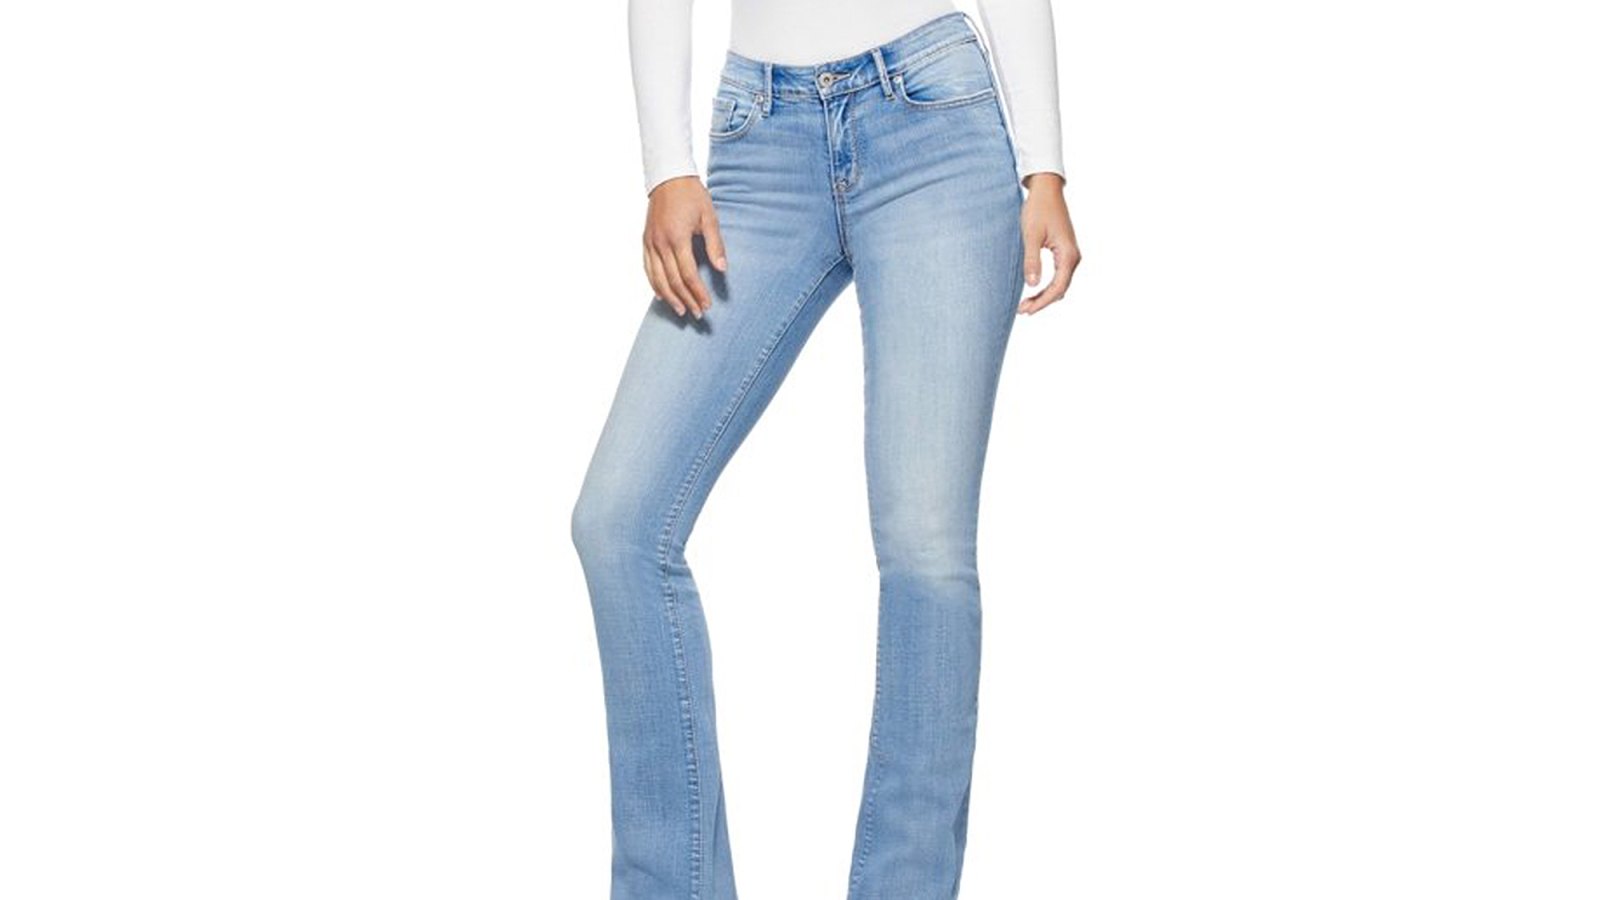 Walmart Shoppers Say They Found the 'Perfect Jean' With This $29 Pair